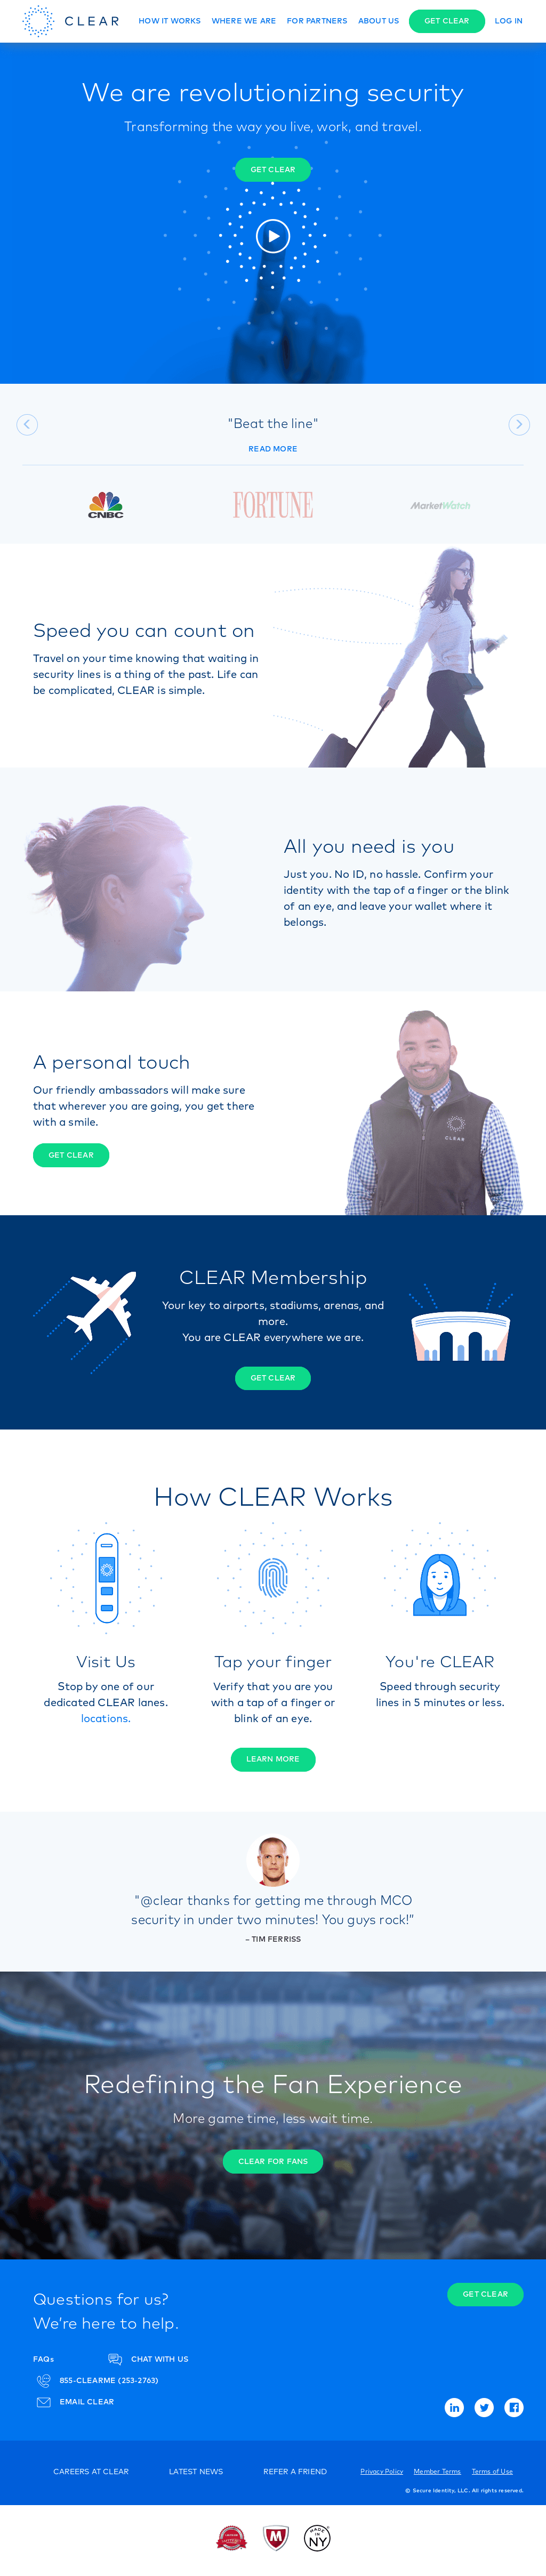 Clear Me Logo - CLEAR Competitors, Revenue and Employees - Owler Company Profile